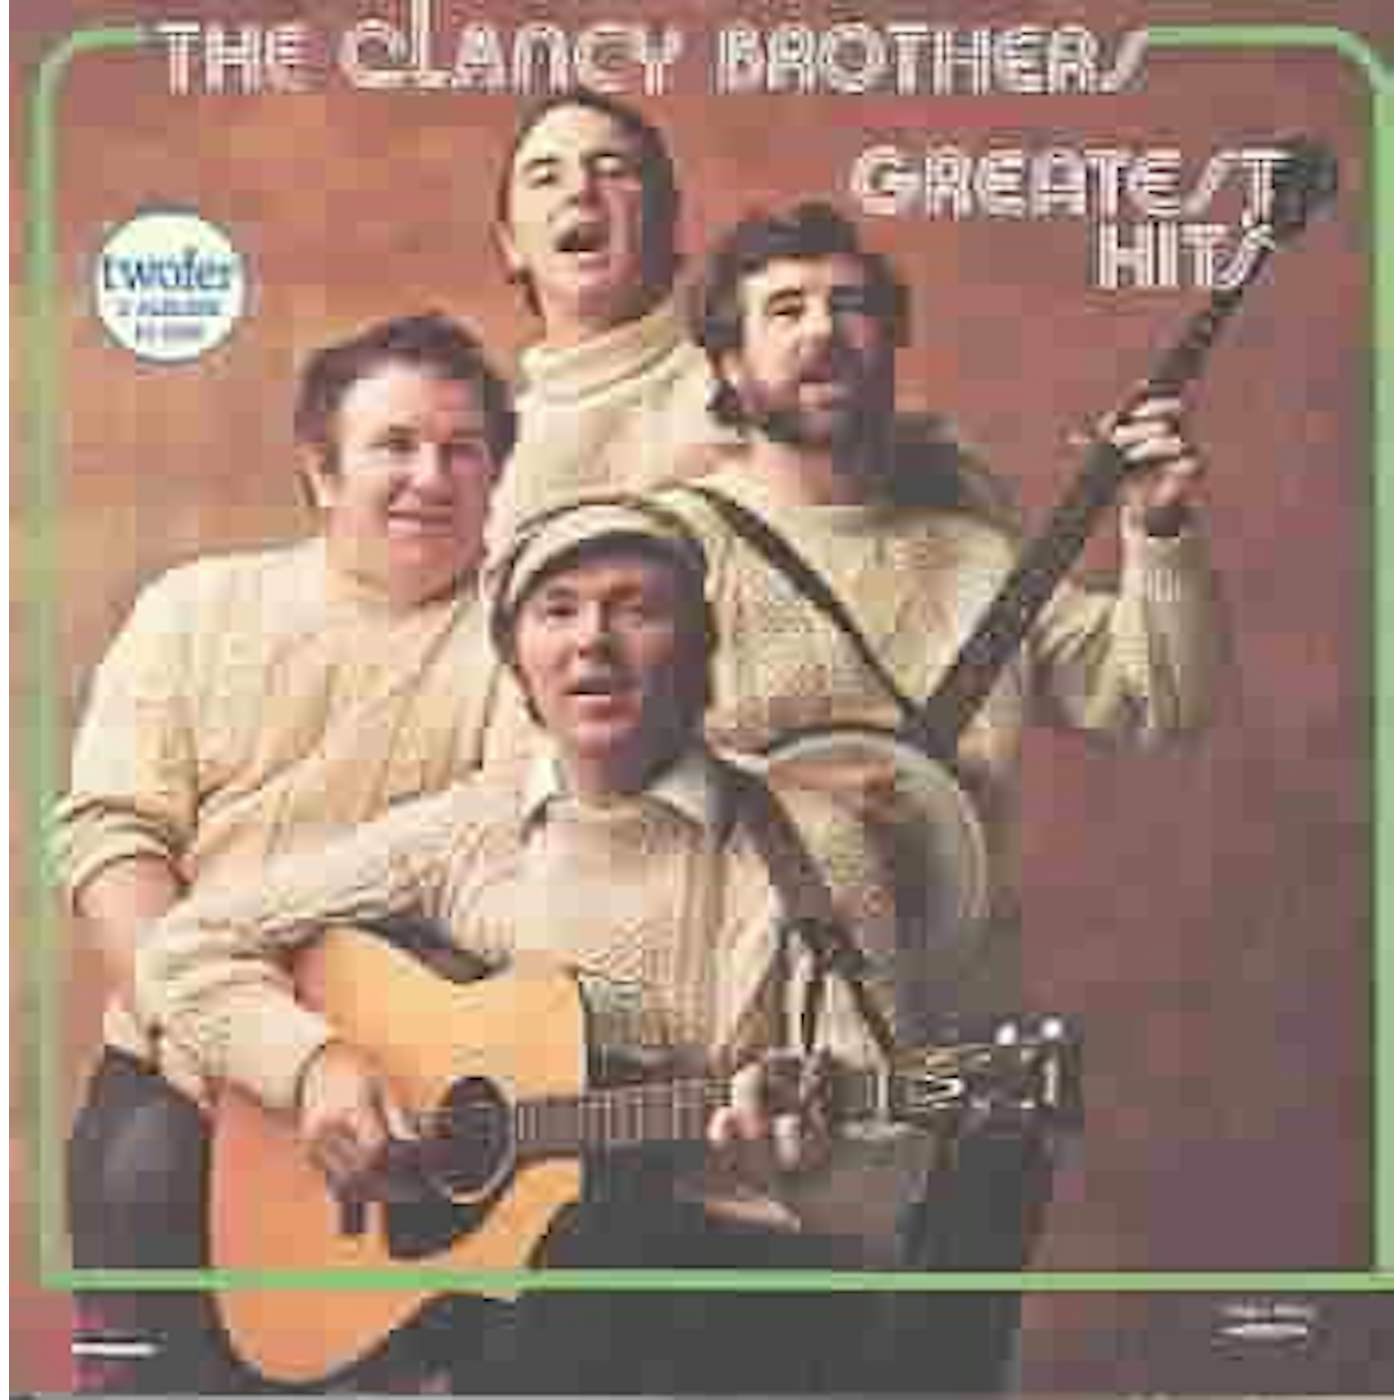 The Clancy Brothers Greatest Hits CD